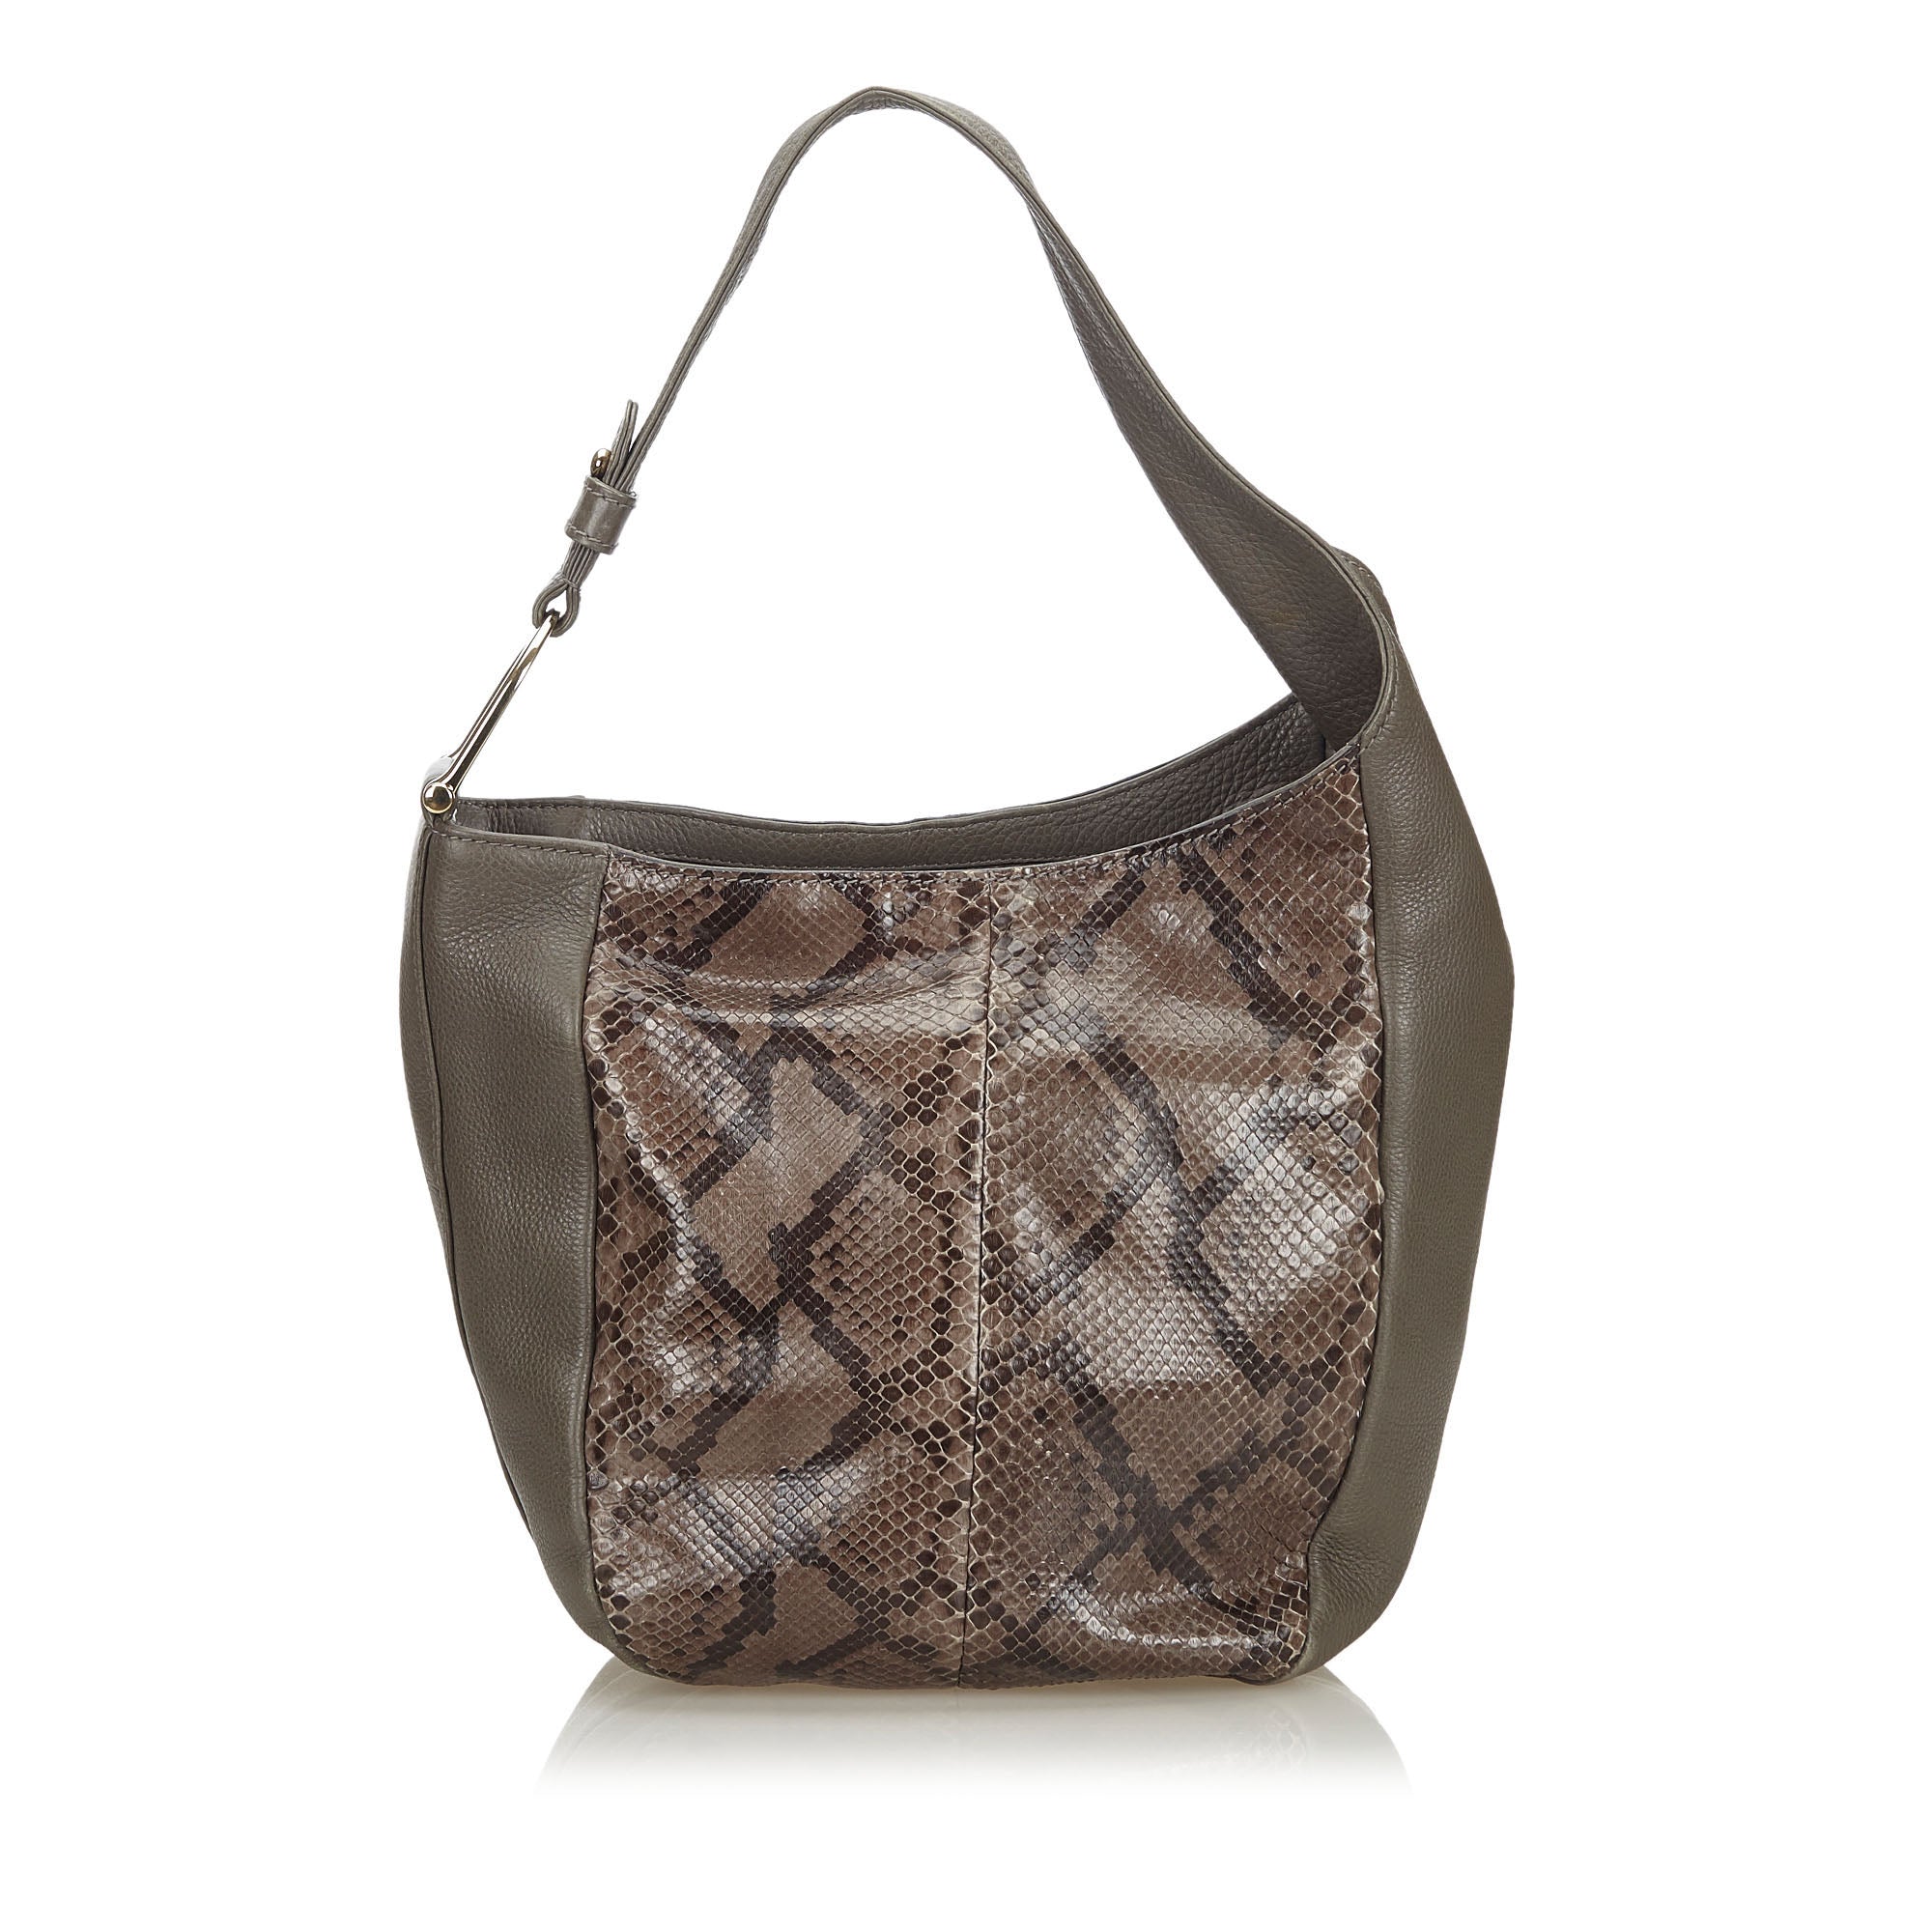 Buy & Consign Authentic Gucci Python Leather Greenwich Shoulder Bag at The Plush Posh